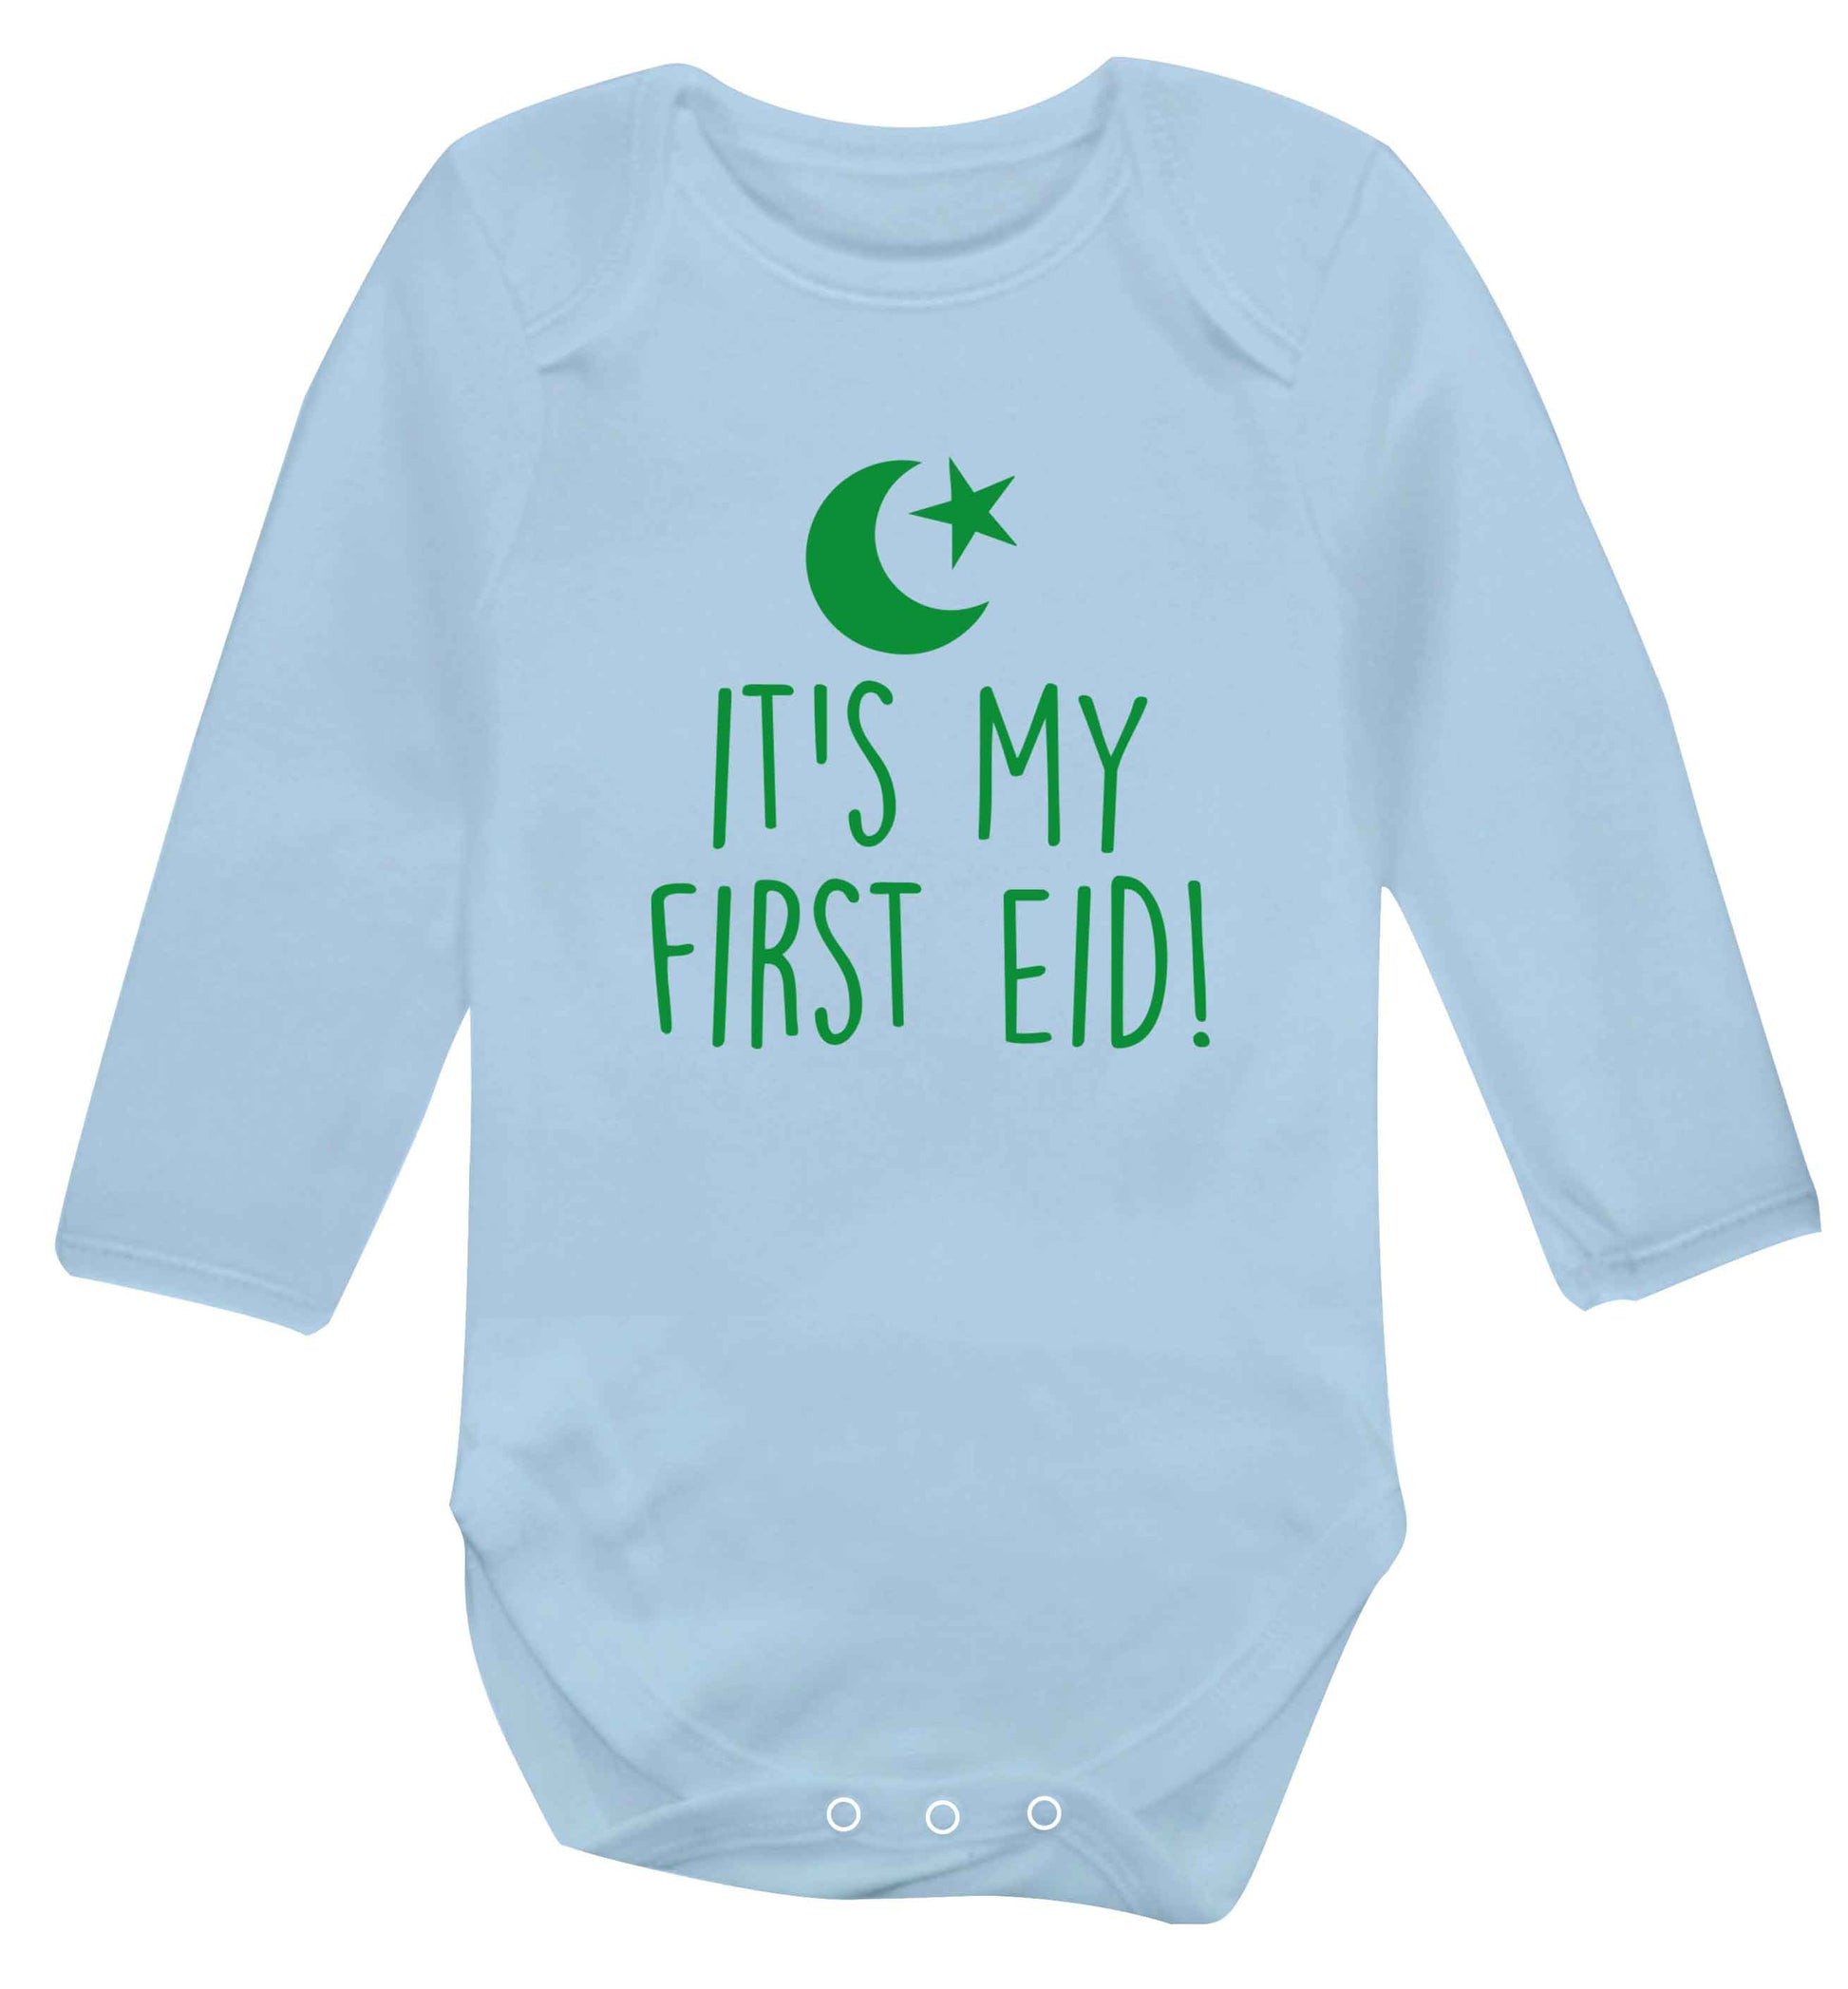 It's my first Eid baby vest long sleeved pale blue 6-12 months